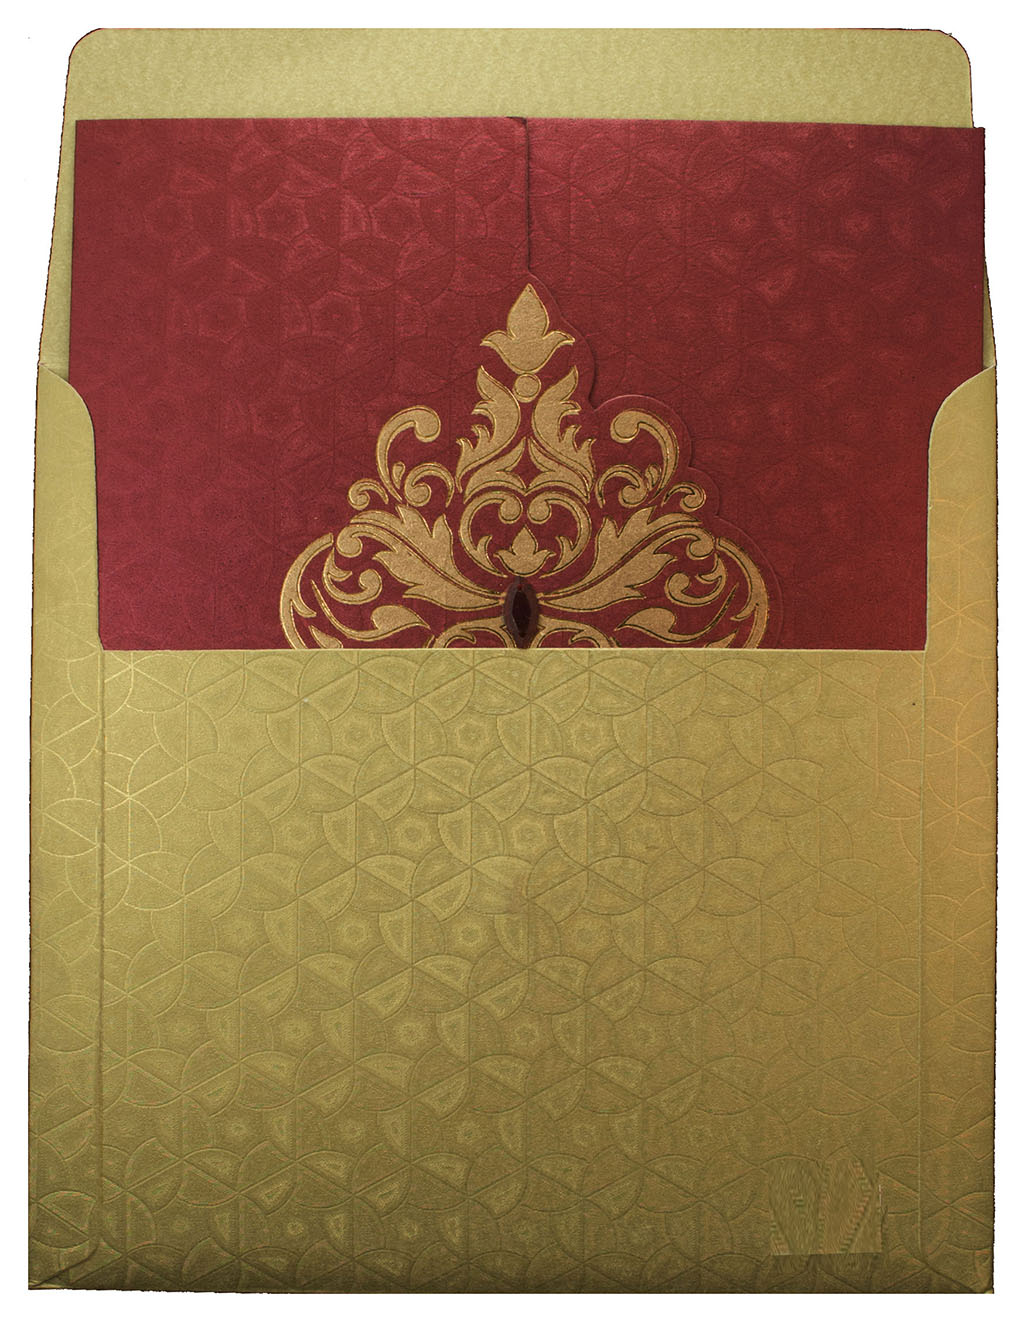 Elegant Wedding Invite in Maroon with Golden Patterns - Click Image to Close